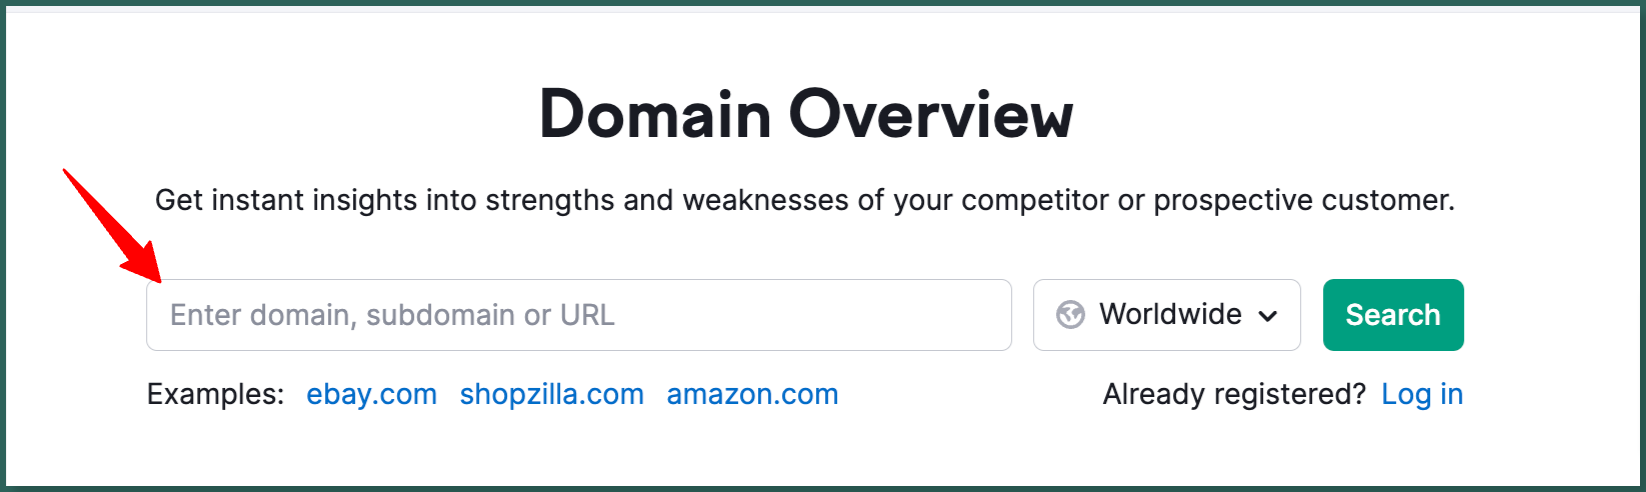 Domain-Overview